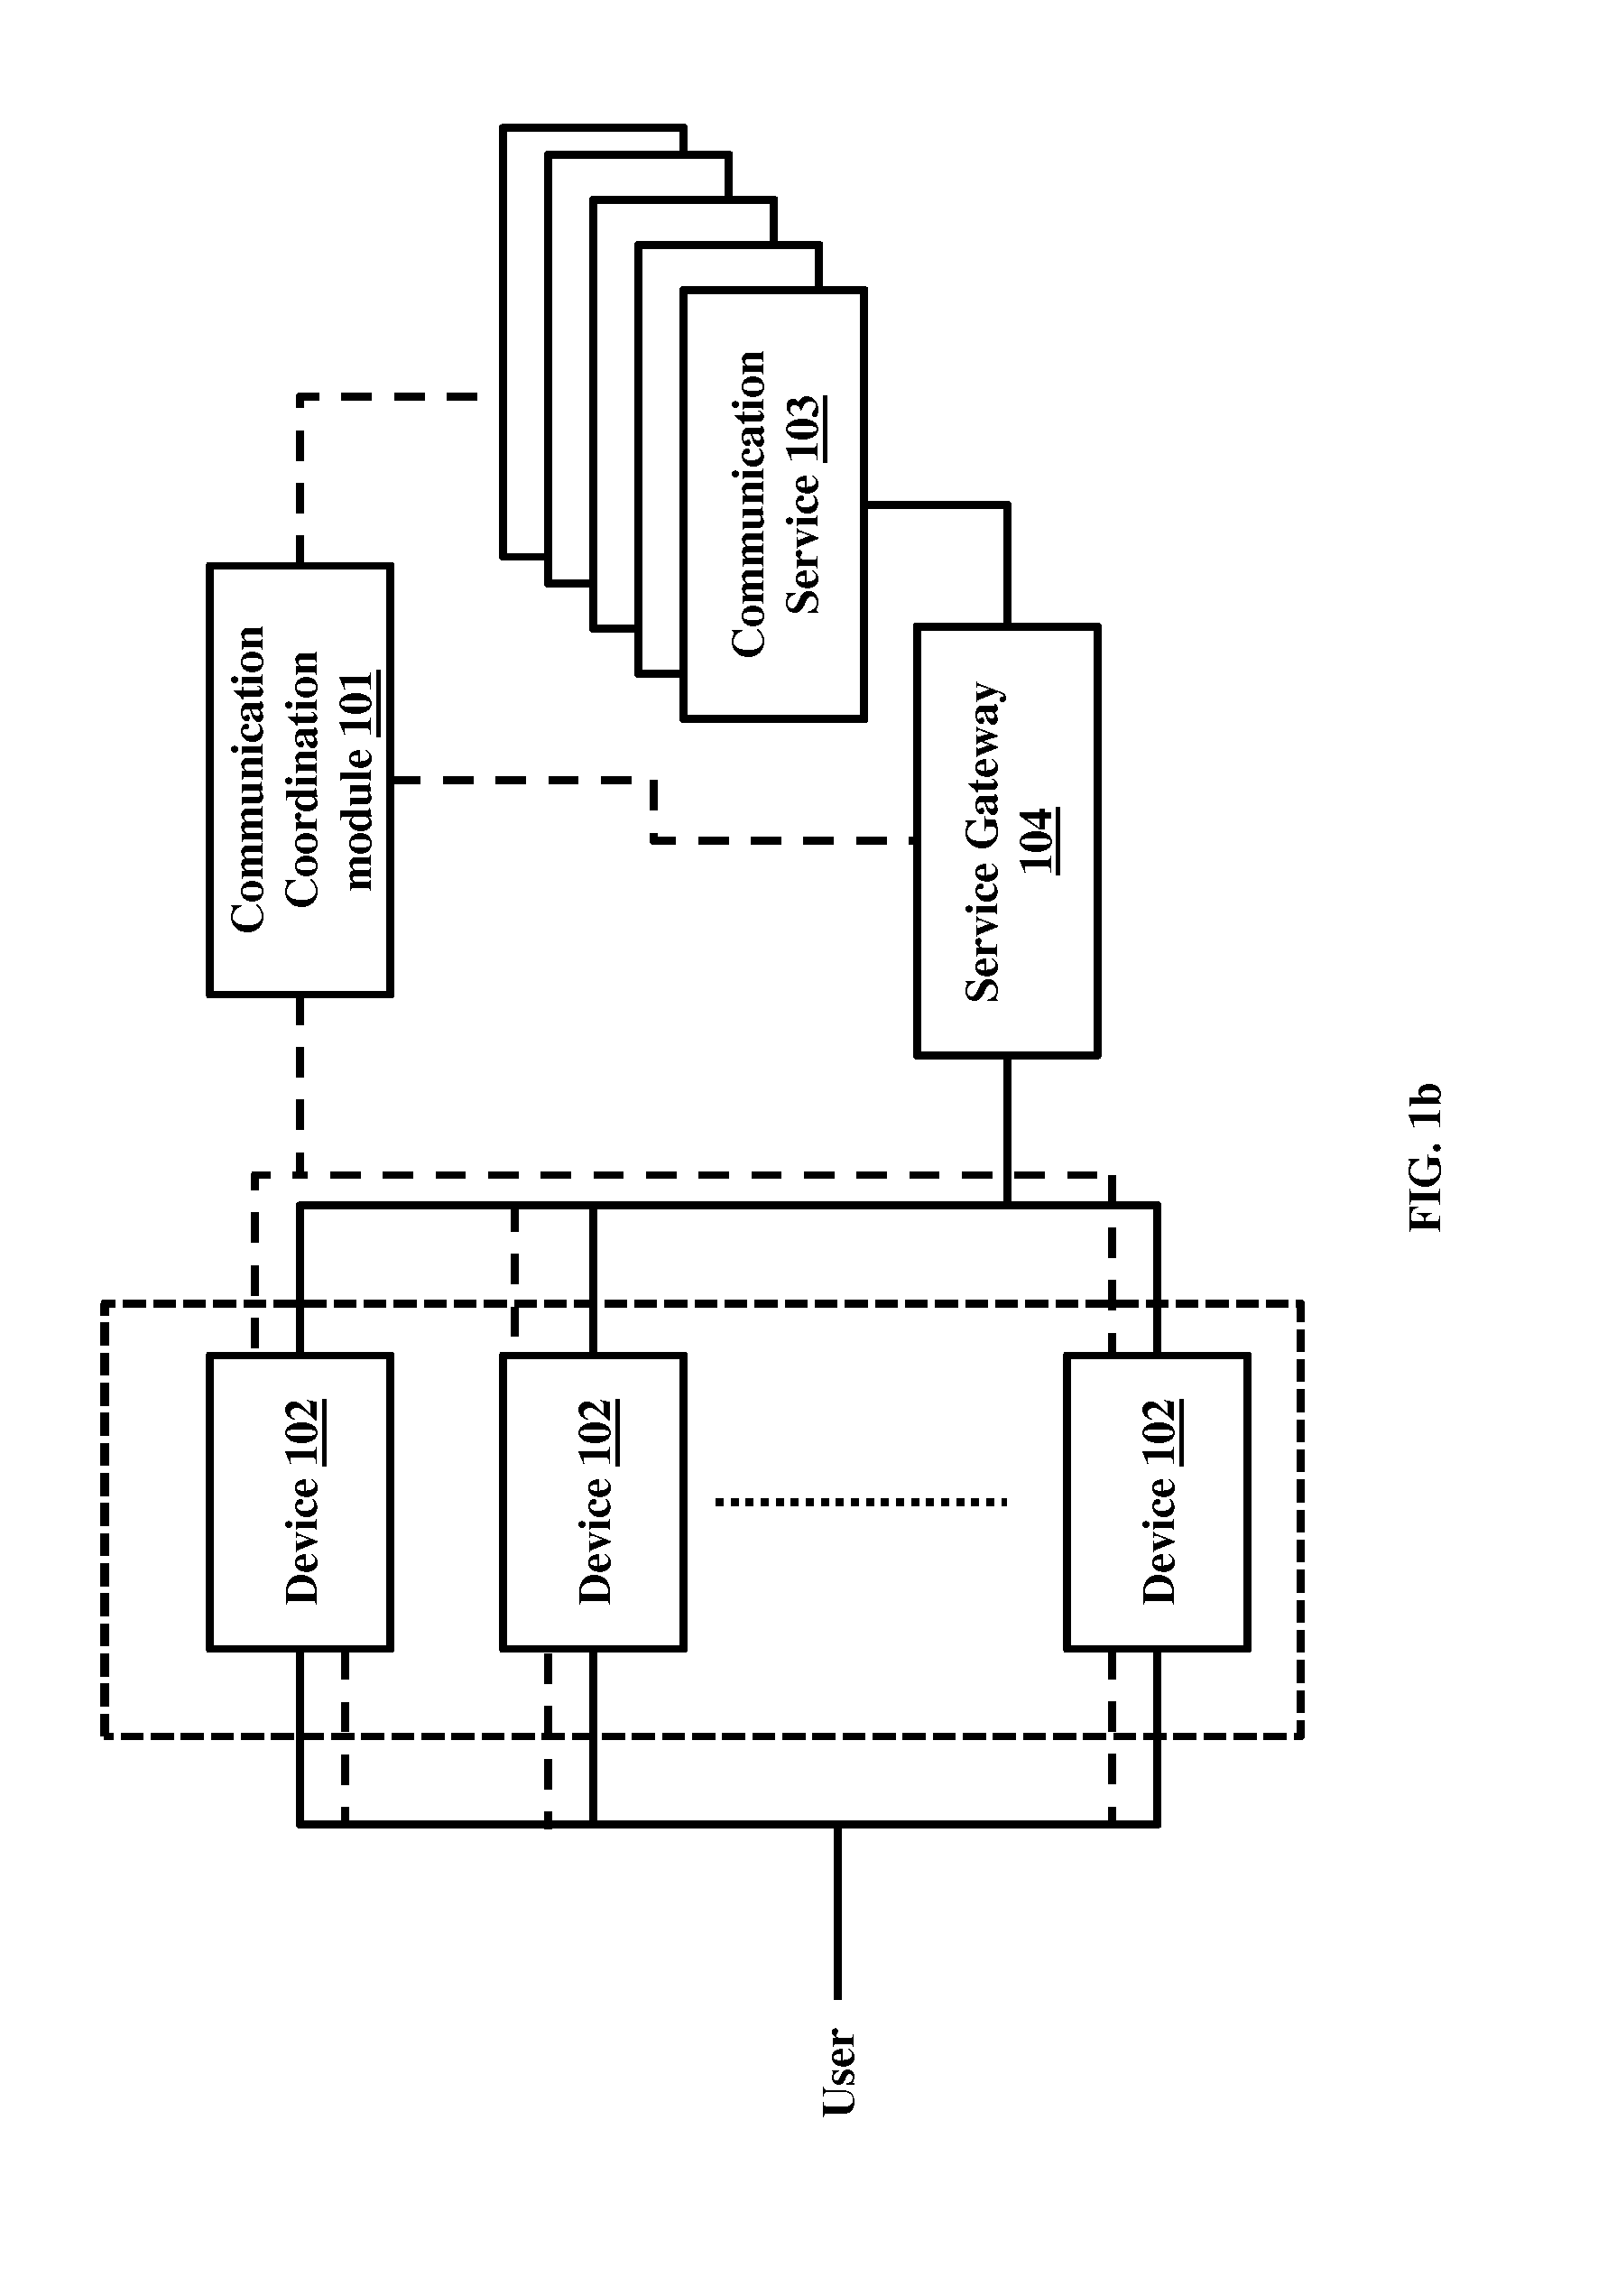 Managing communication services for enabling a distributed user presence